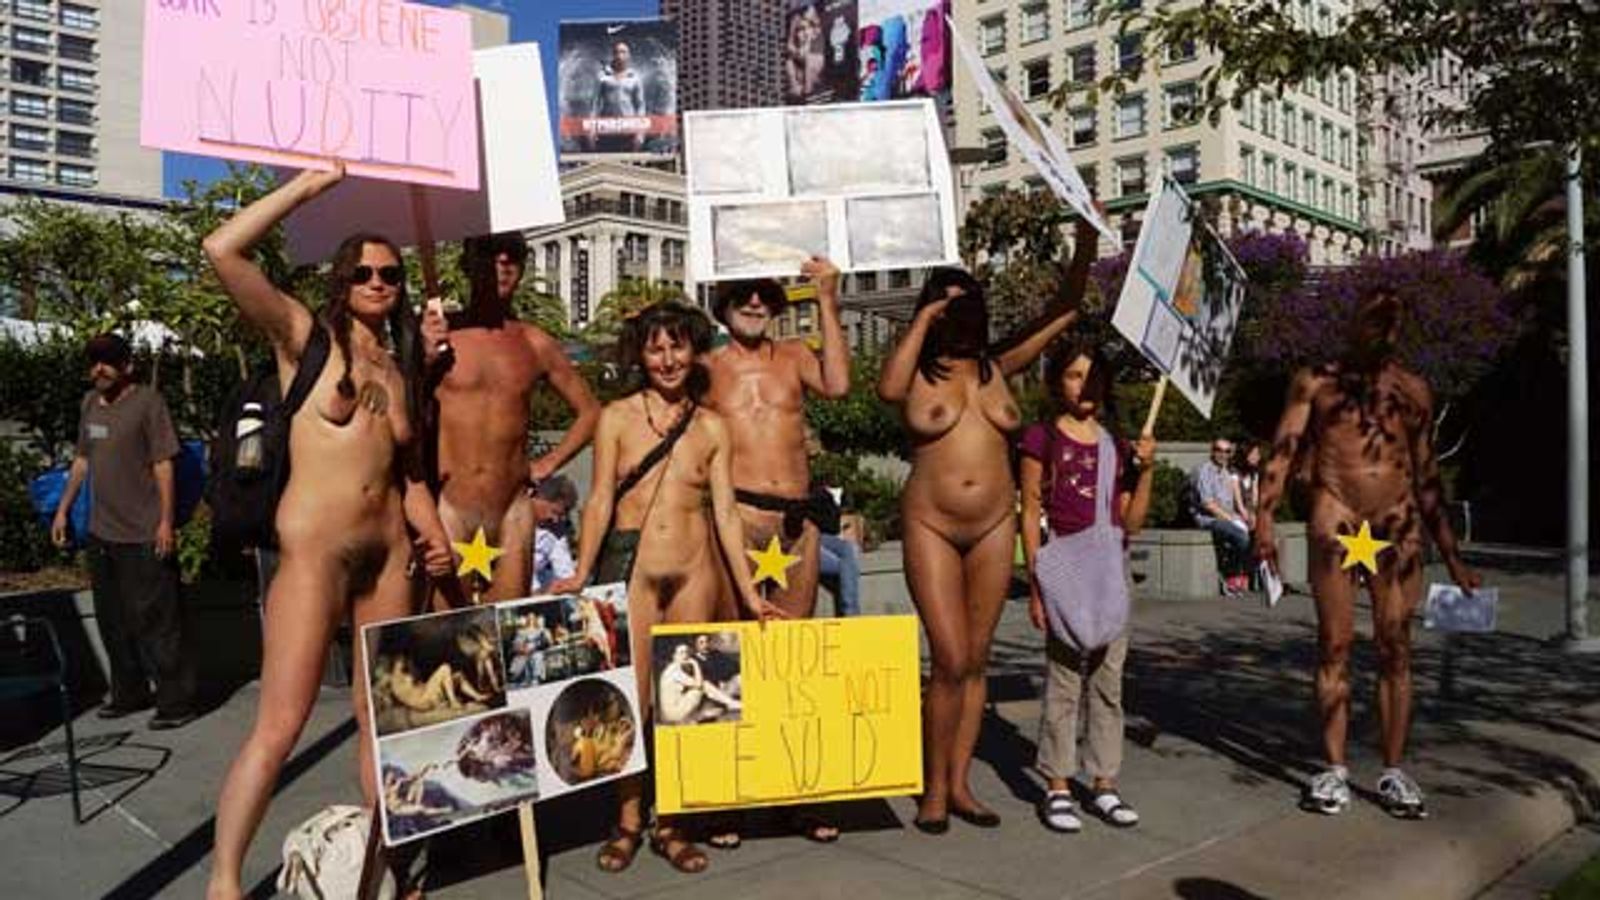 Ruh-Roh! Nudists 'Force' Cancellation of Dem Committee Meeting